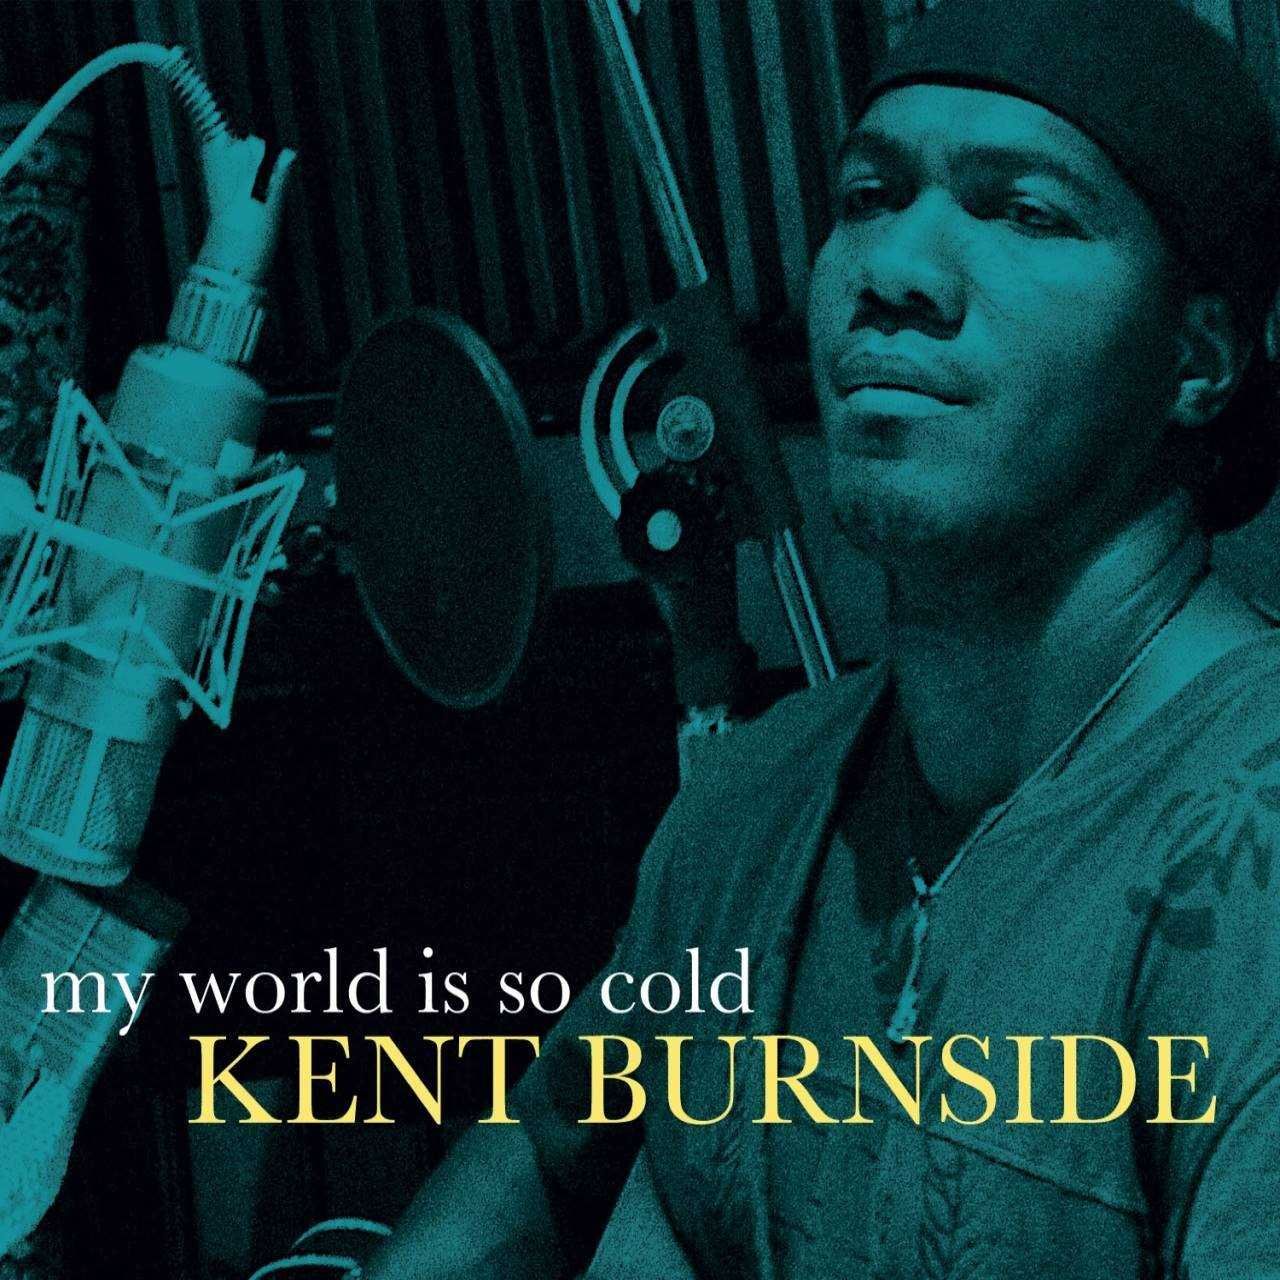 Kent Burnside – “My World Is So Cold” cover album